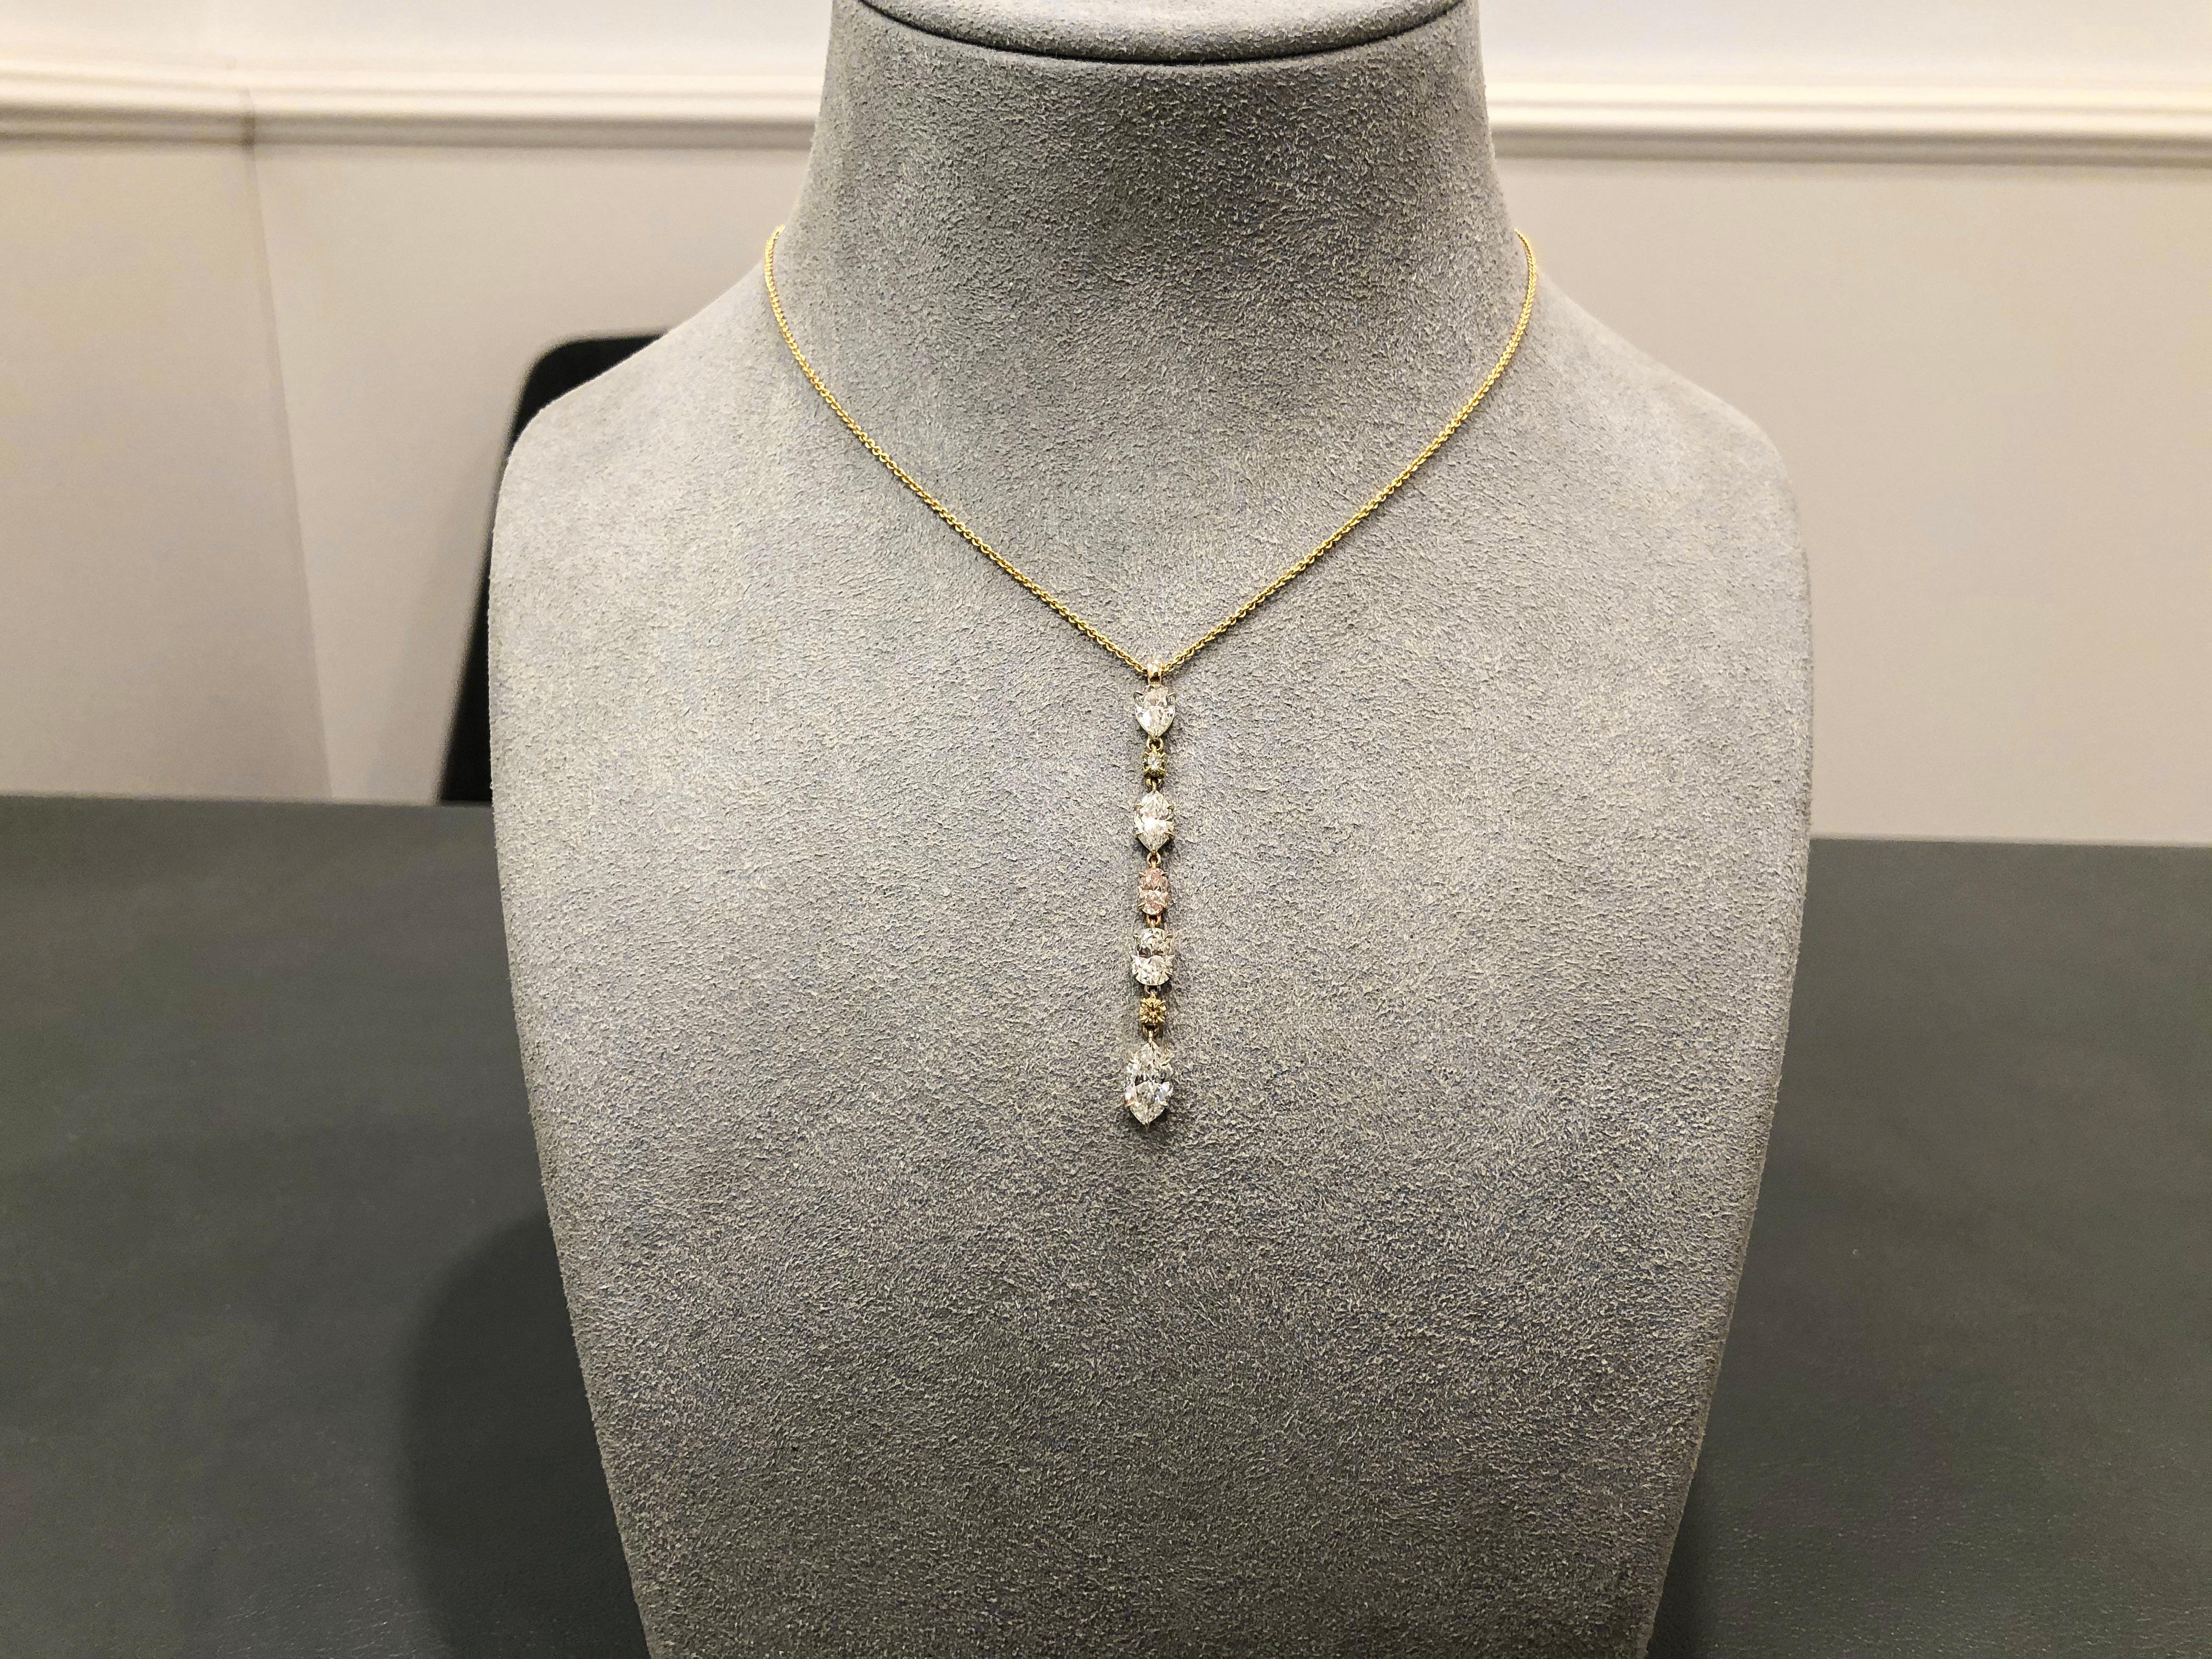 This is an incredibly gorgeous and colorful necklace showcasing different or fancy shaped diamonds set in an elegant drop. Each white diamond is spaced by either pink or yellow diamonds. Each diamond is set in an 18 karat yellow gold basket. White